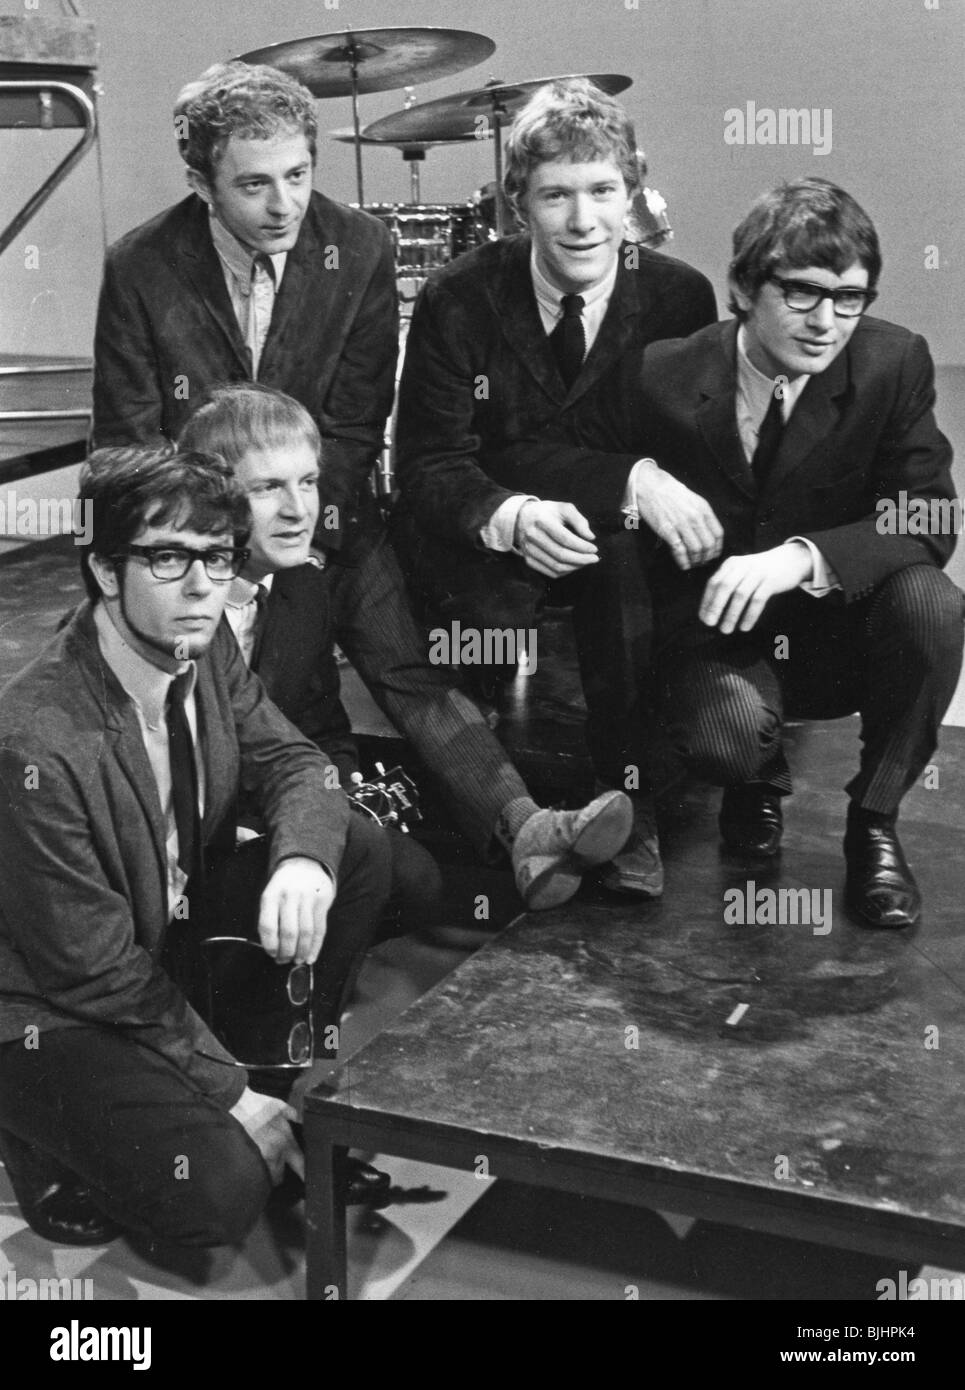 MANFRED MANN in August 1964 from l: Manfred Mann next to Mike Vickers, Mike Hugg, Paul Jones and Tom McGuinness Stock Photo